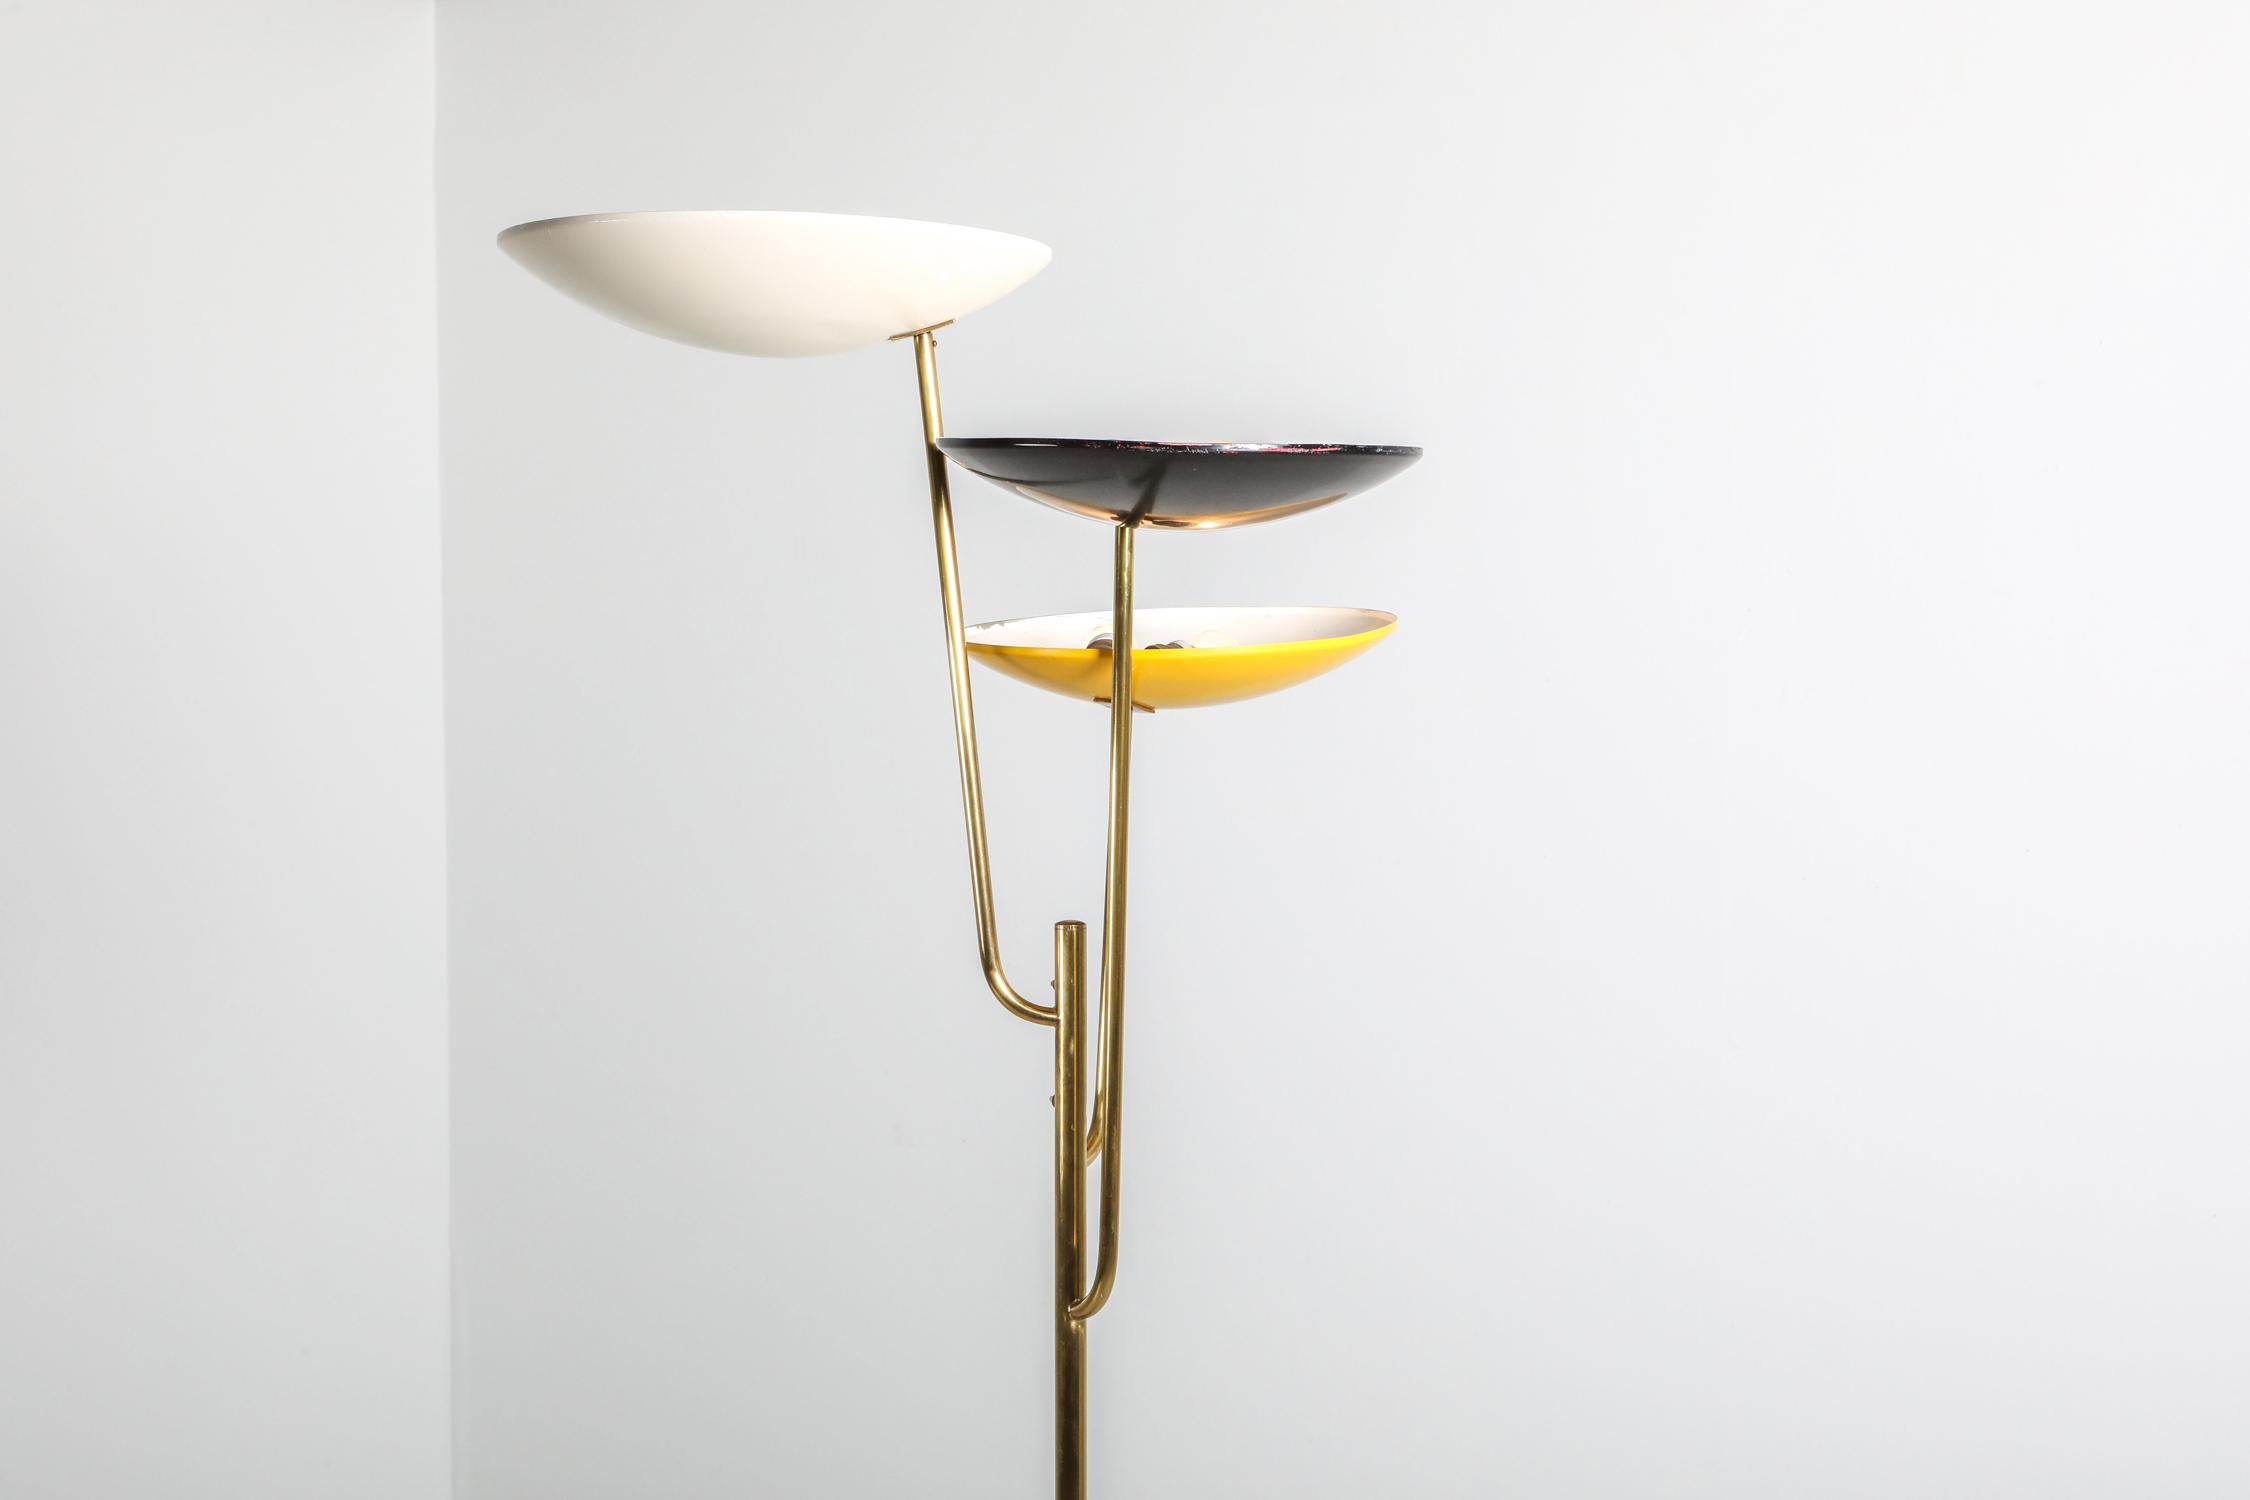 20th Century Italian Floor Lamp 1950s Style with a White, Yellow and Black Shade